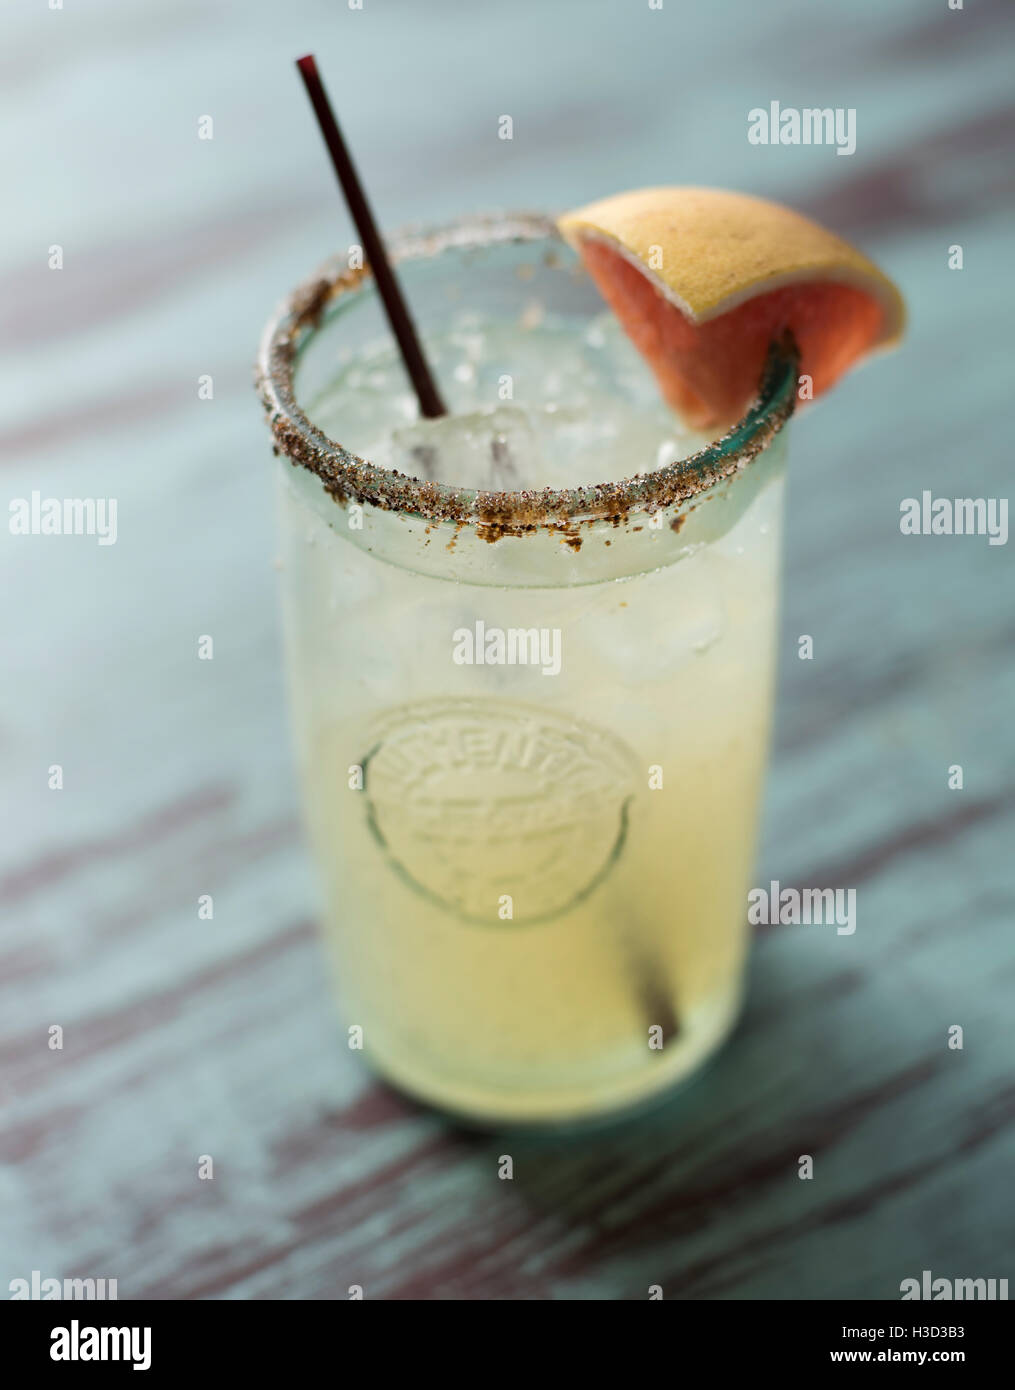 Close-up of drink served on wooden table Stock Photo